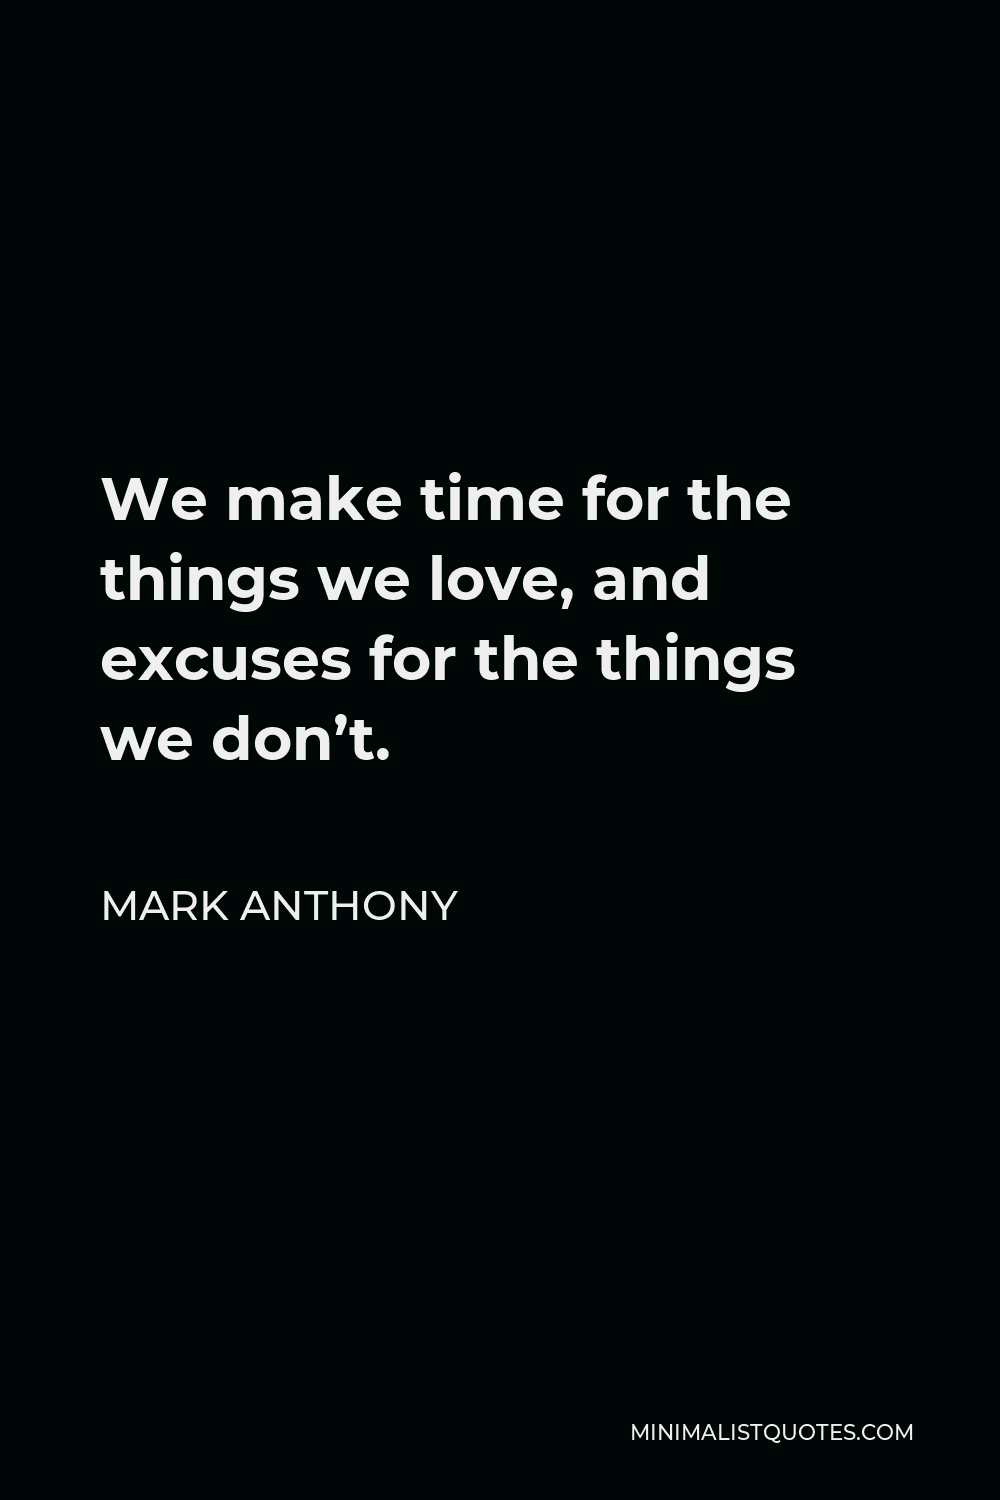 Mark Anthony Quote - We make time for the things we love, and excuses for the things we don’t.